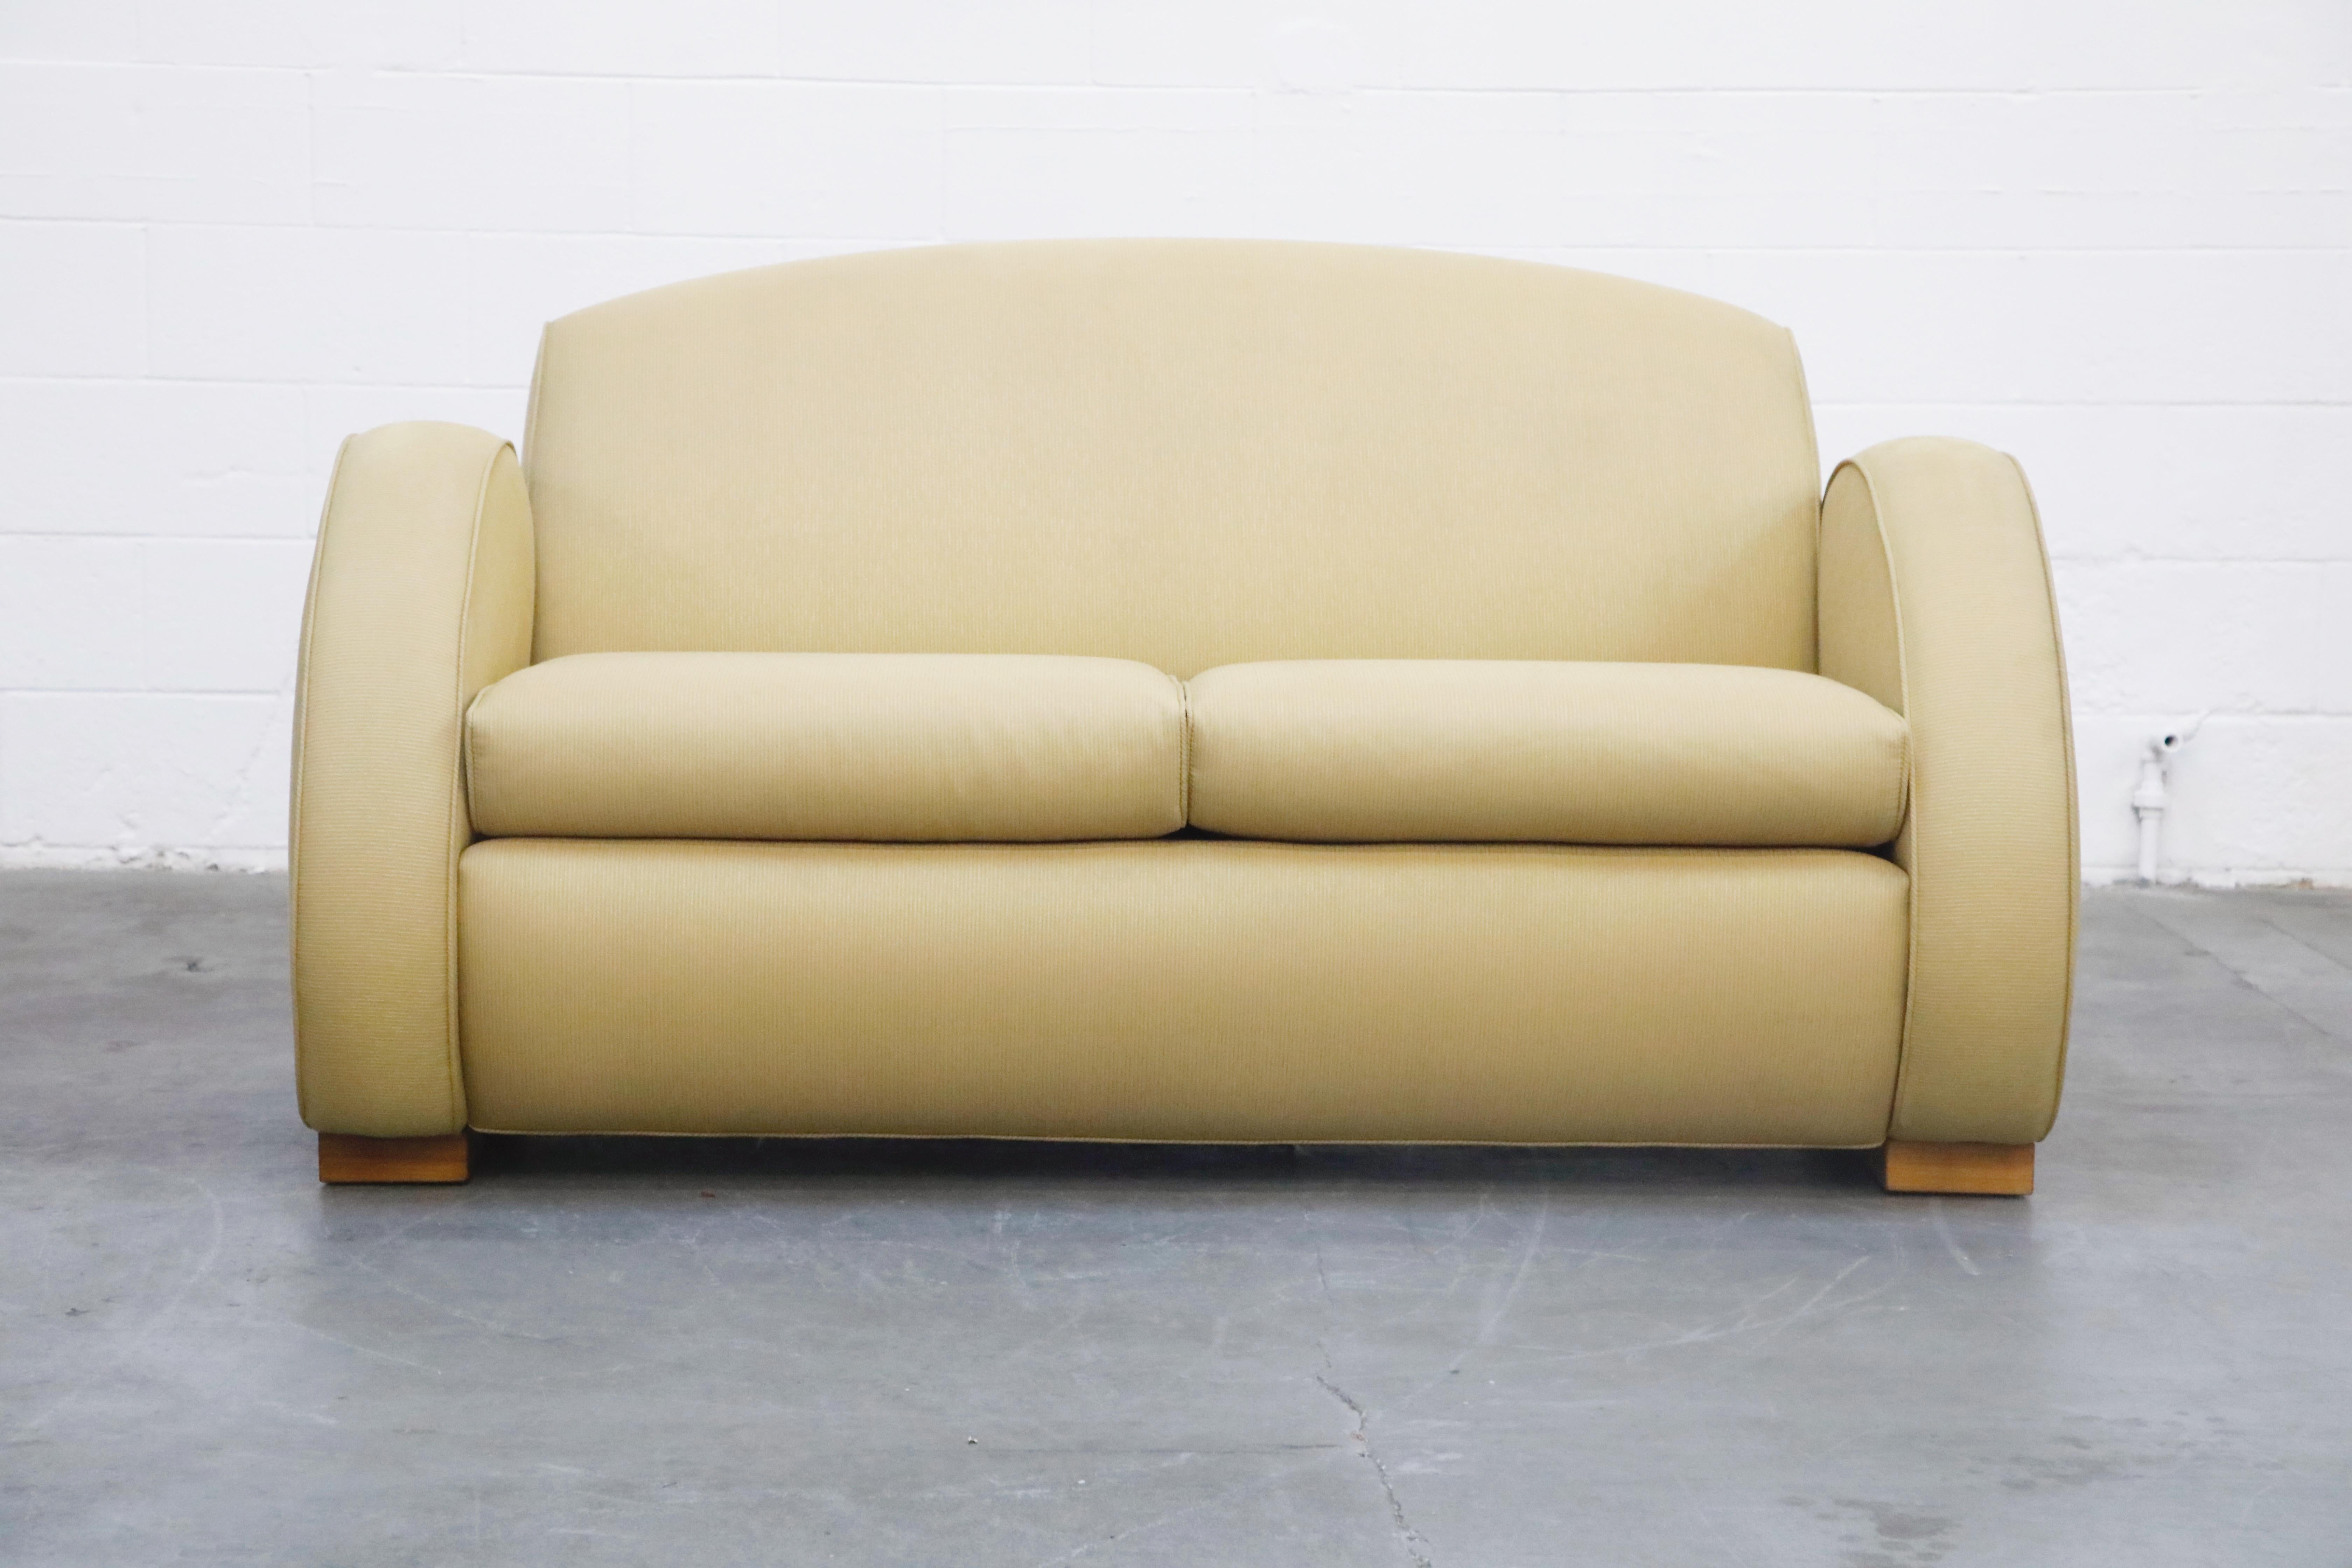 Custom-made and high-quality Art Deco style loveseat upholstered in a yellow fabric. This deep-seated settee comprise of comfortably reclined back and oversized rounded arms which reflect the Art Deco style. These chairs sit atop sturdy art deco